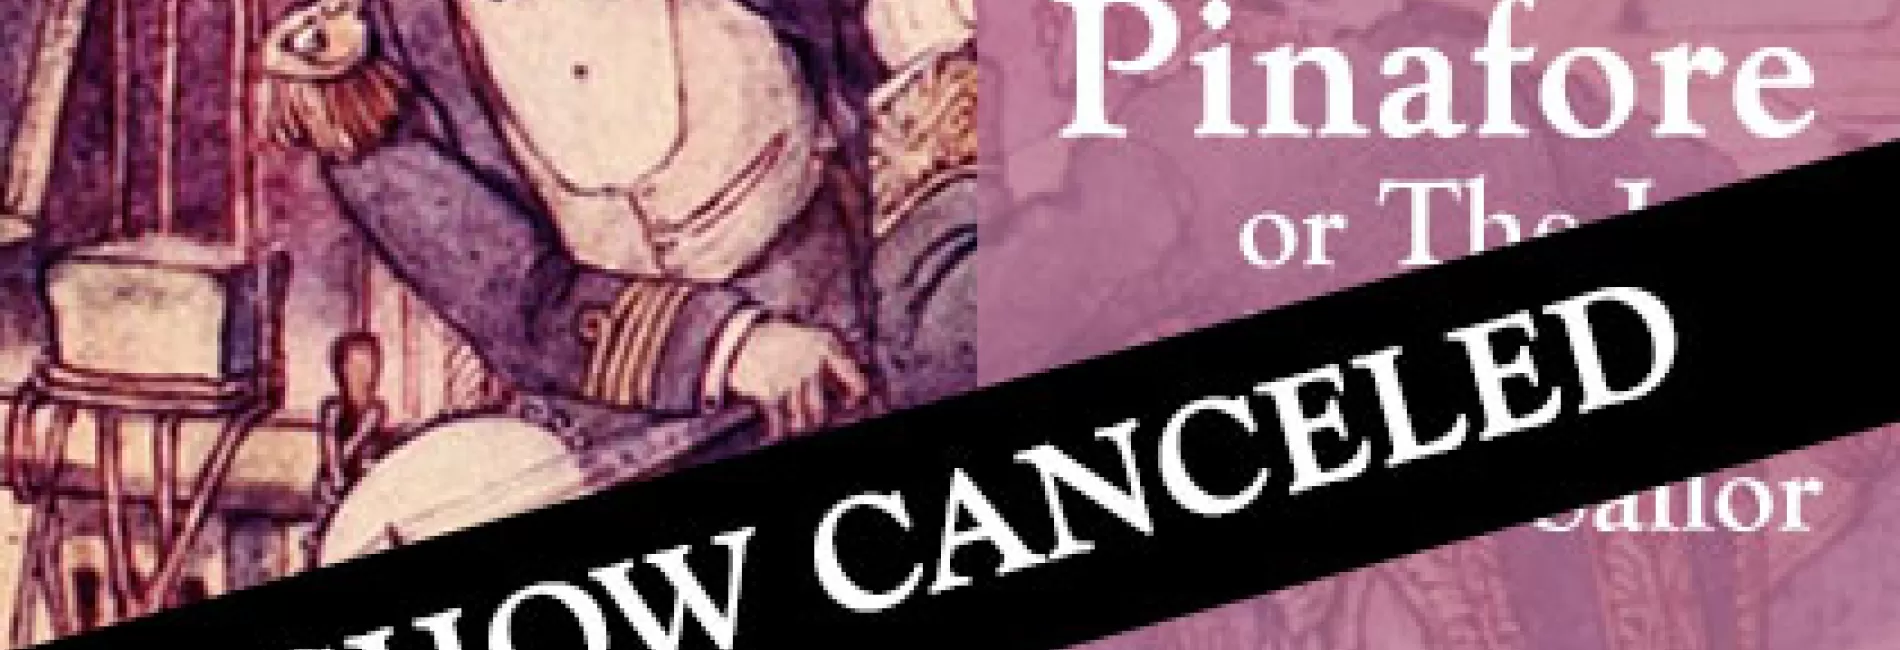 HMS Pinafore Streaming Package: CANCELED